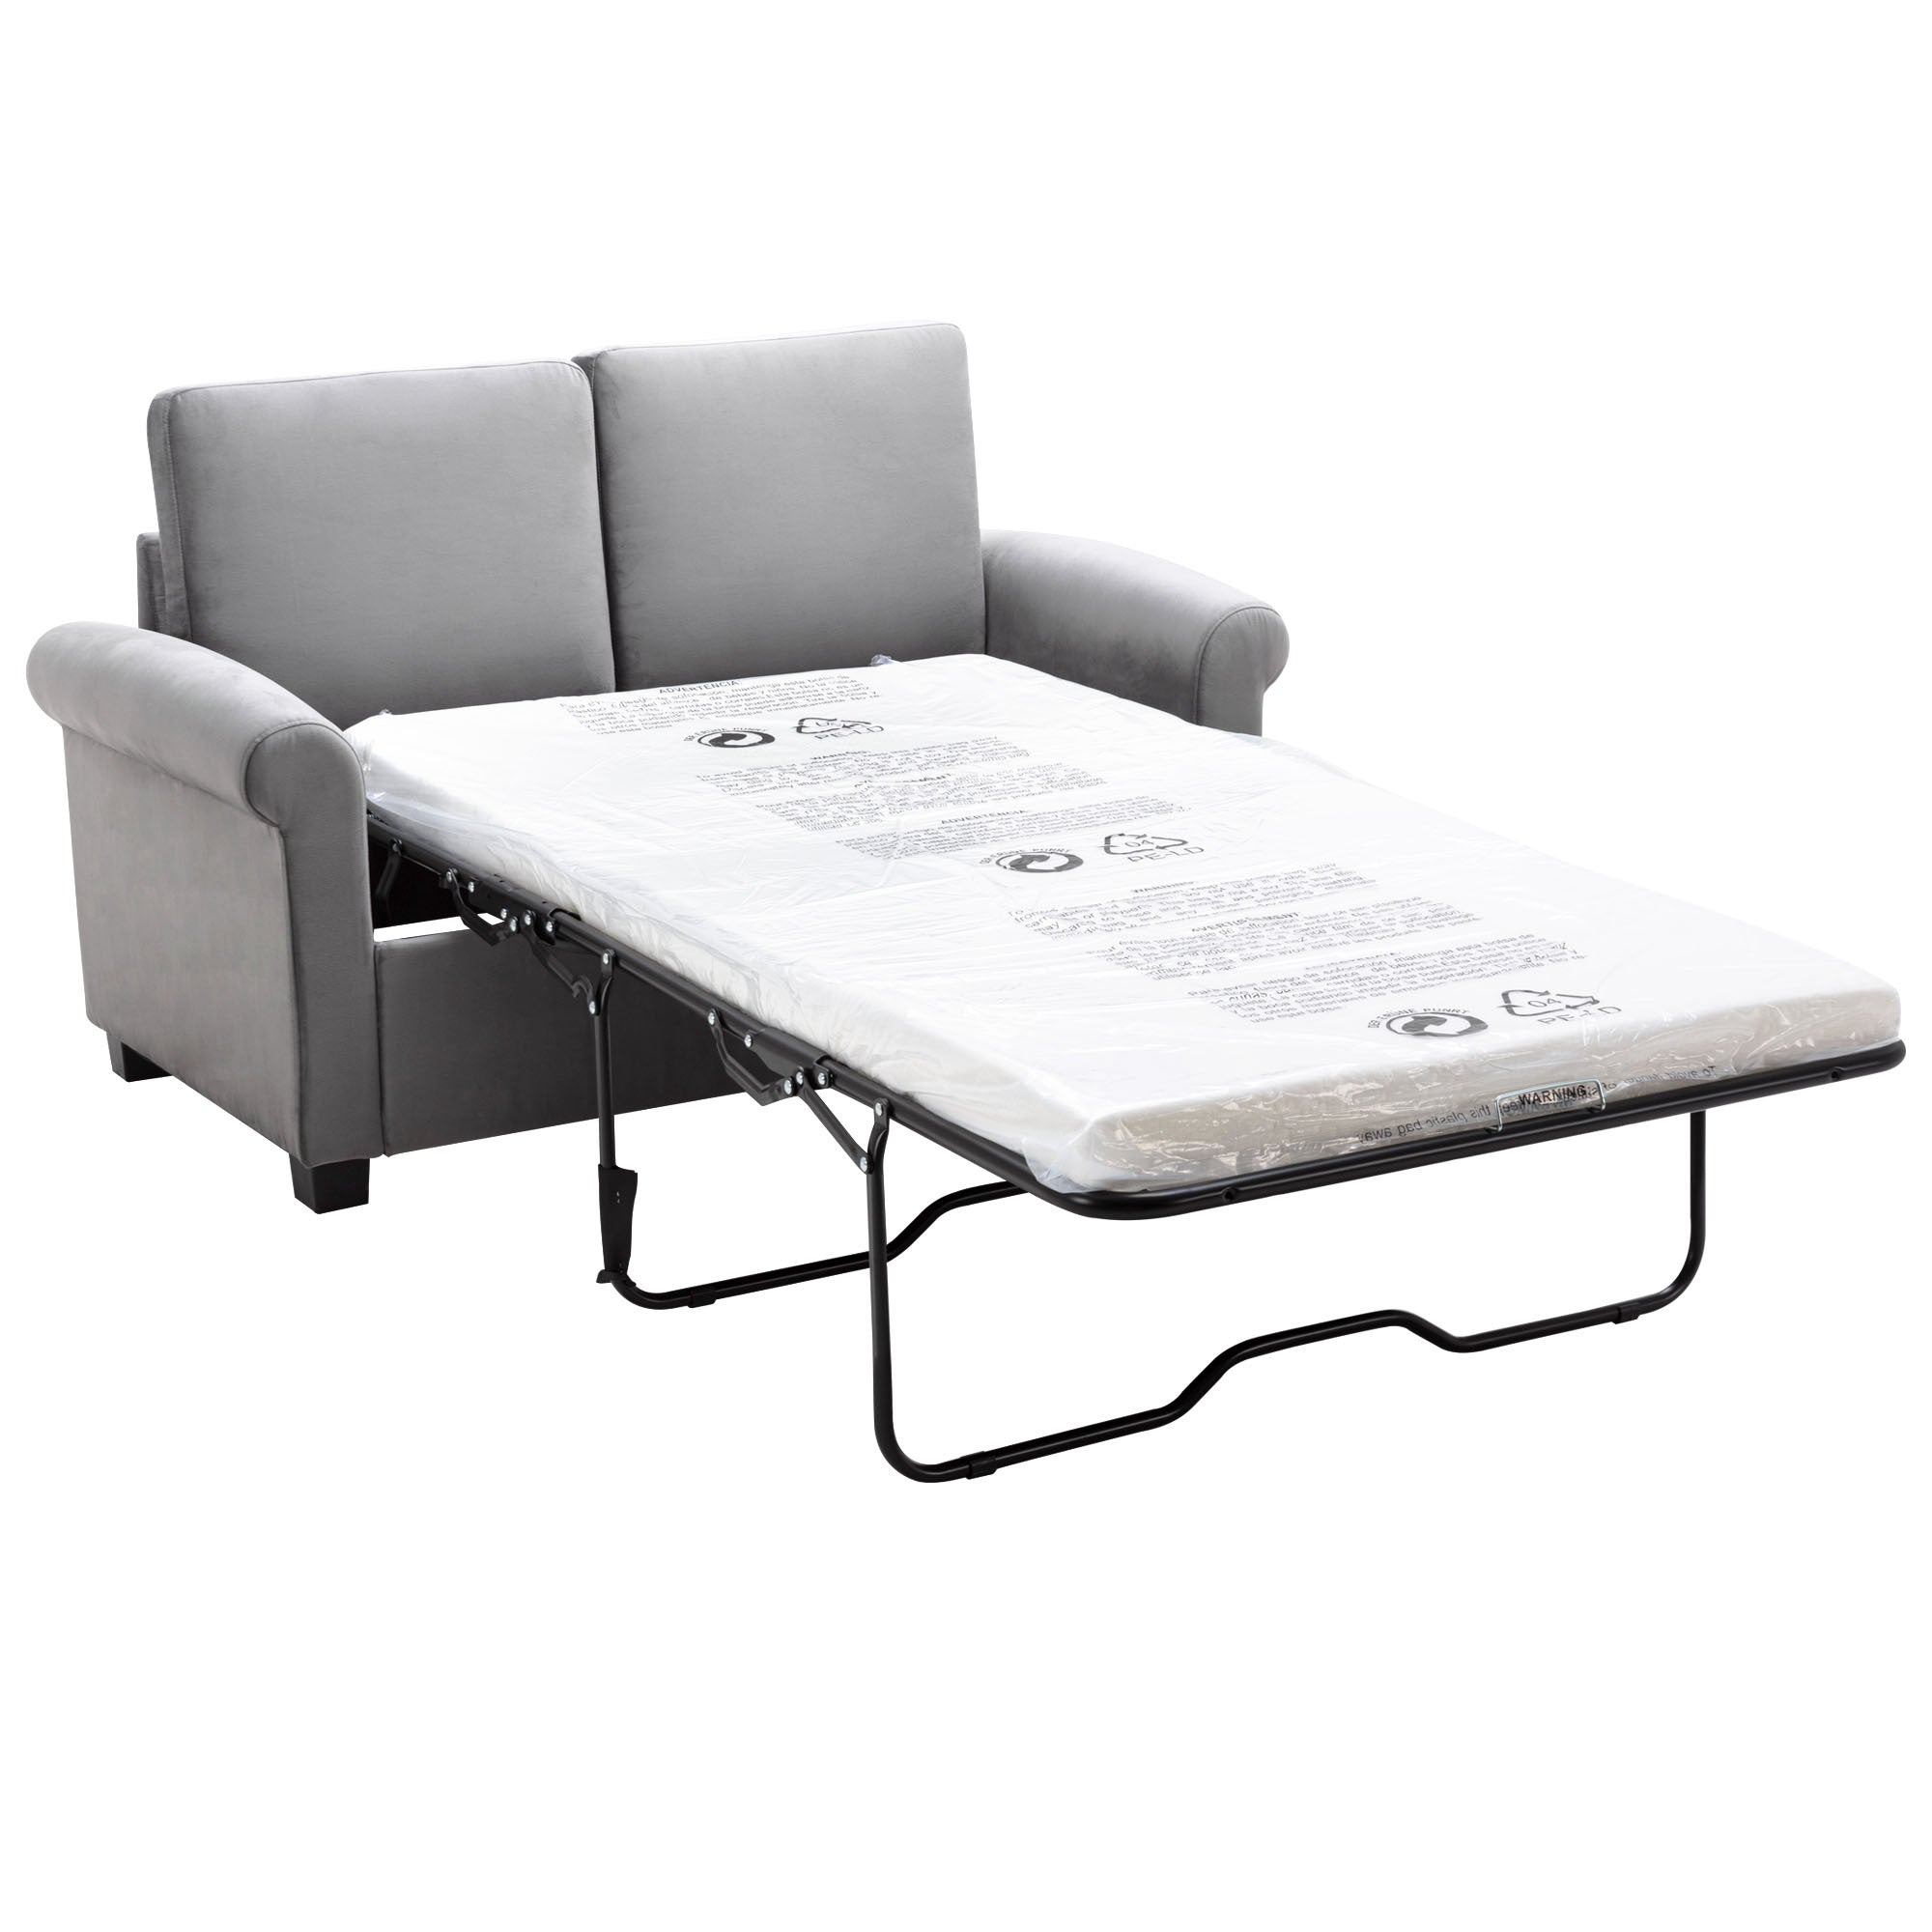 58.3" Pull Out Sofa Bed,Sleeper Sofa Bed with Premium grey-foam-velvet